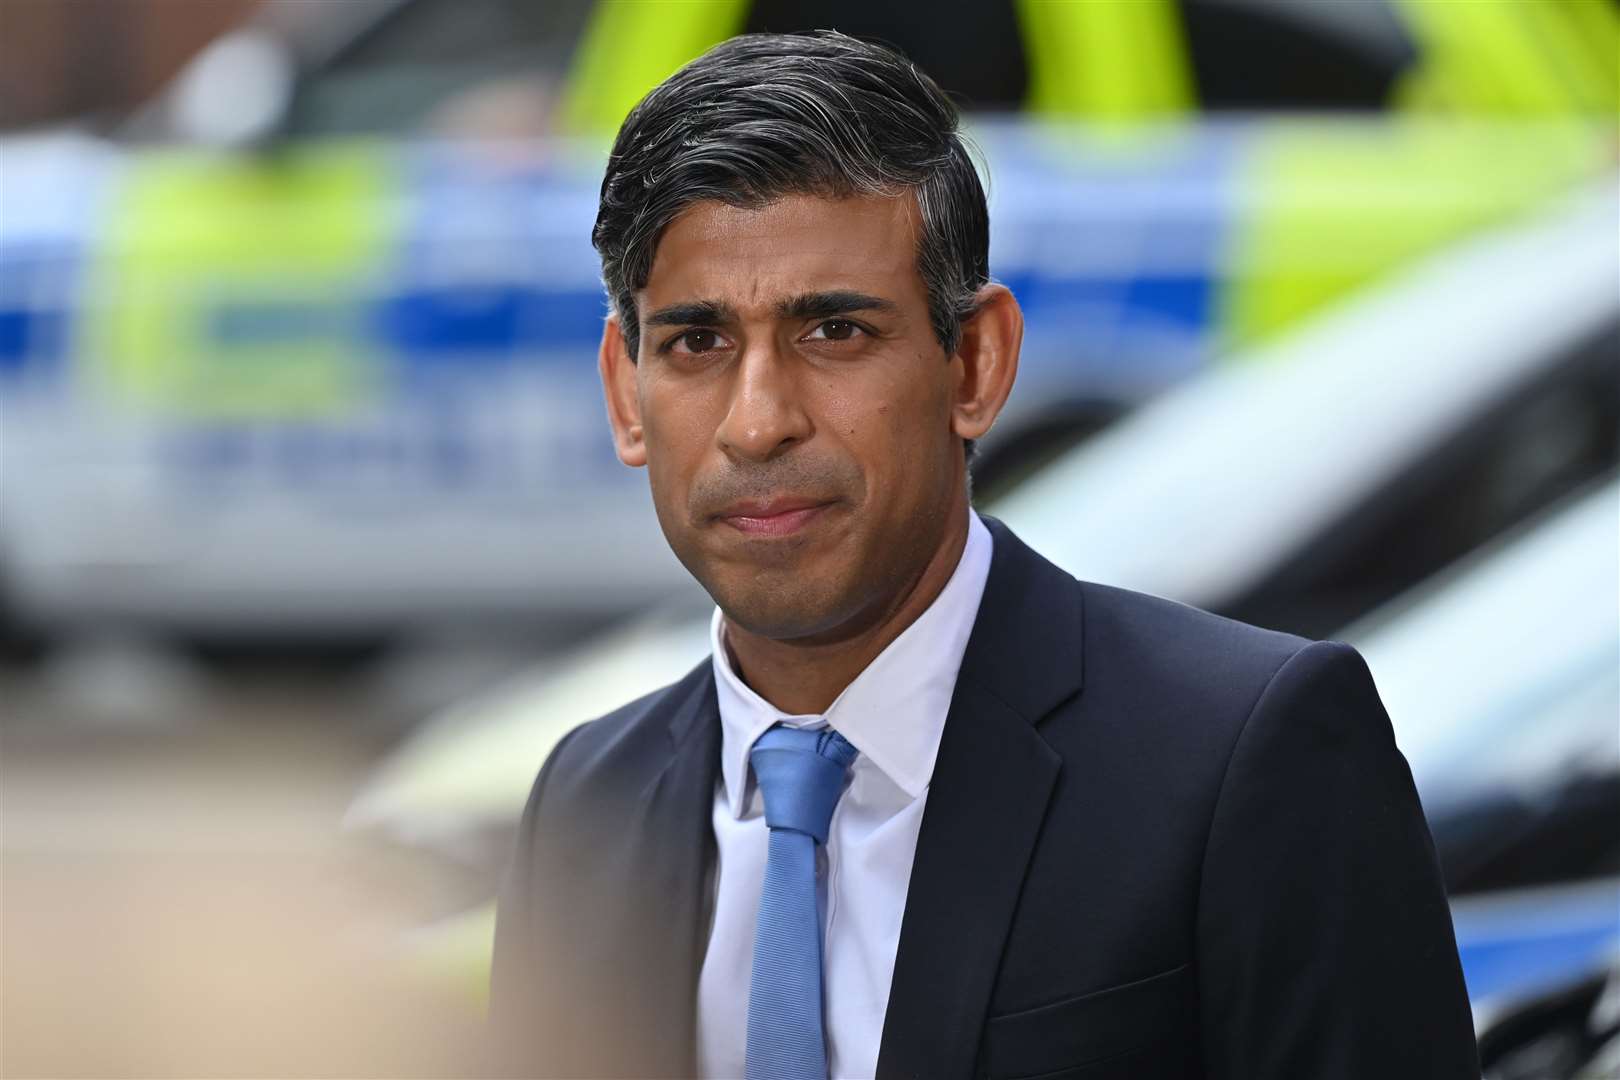 Prime Minister Rishi Sunak gives a pool interview during a visit to Kilburn police station in north west London (Justin Tallis/PA)